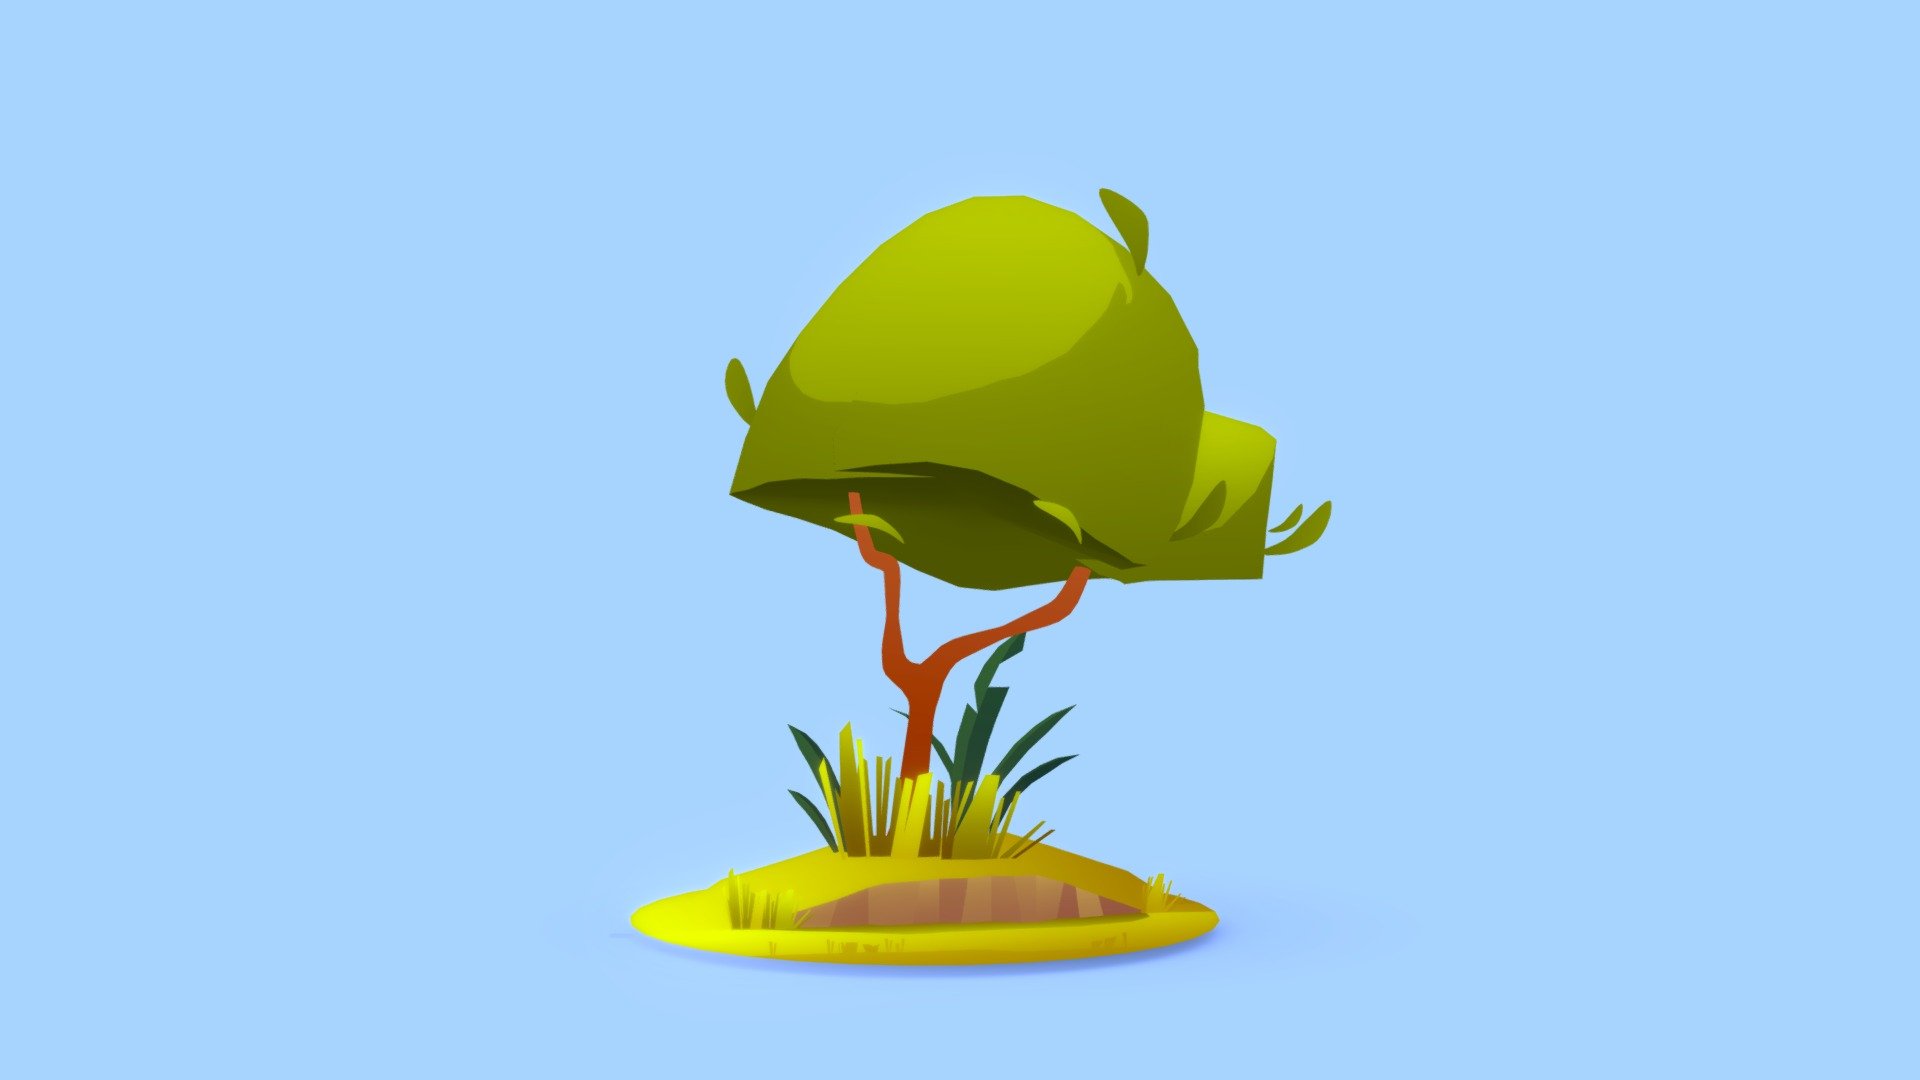 stylized unlit little bush.

Textured with gradient atlas, so it is performant for mobile games and video games.

Like a few of my other assets
in the same style, it uses a single texture diffuse map and is mapped using only color gradients. 
All gradient textures can be extended and combined to a large atlas.

There are more assets in this style to add to your game scene or environment. Check out my sale.

If you want to change the colors of the assets, you just need to move the UVs on the atlas to a different gradient.
Or contact me for changes, for a small fee.

I also accept freelance jobs. Do not hesitate to write me. 

*-------------Terms of Use--------------

Commercial use of the assets  provided is permitted but cannot be included in an asset pack or sold at any sort of asset/resource marketplace.* - Stylized Bush - Buy Royalty Free 3D model by Stylized Box (@Stylized_Box) 3d model